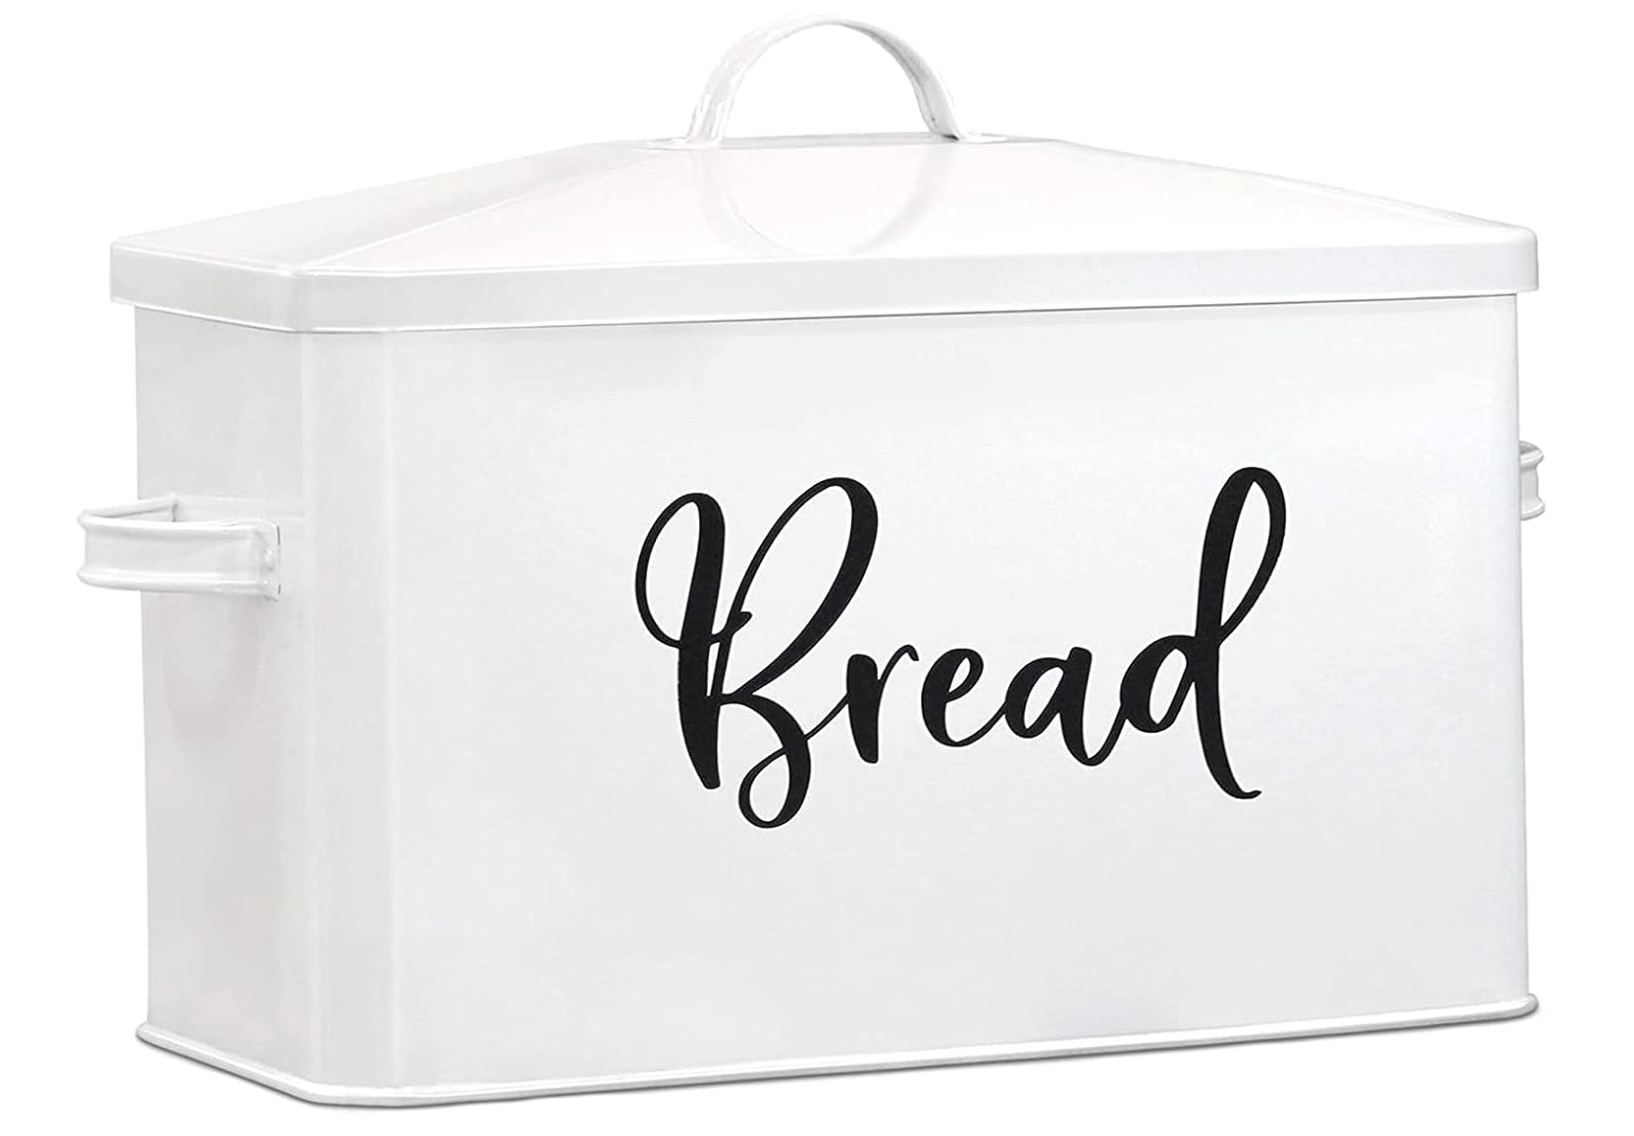 This Container Keeps Bread Fresh, Mold-Free for Weeks